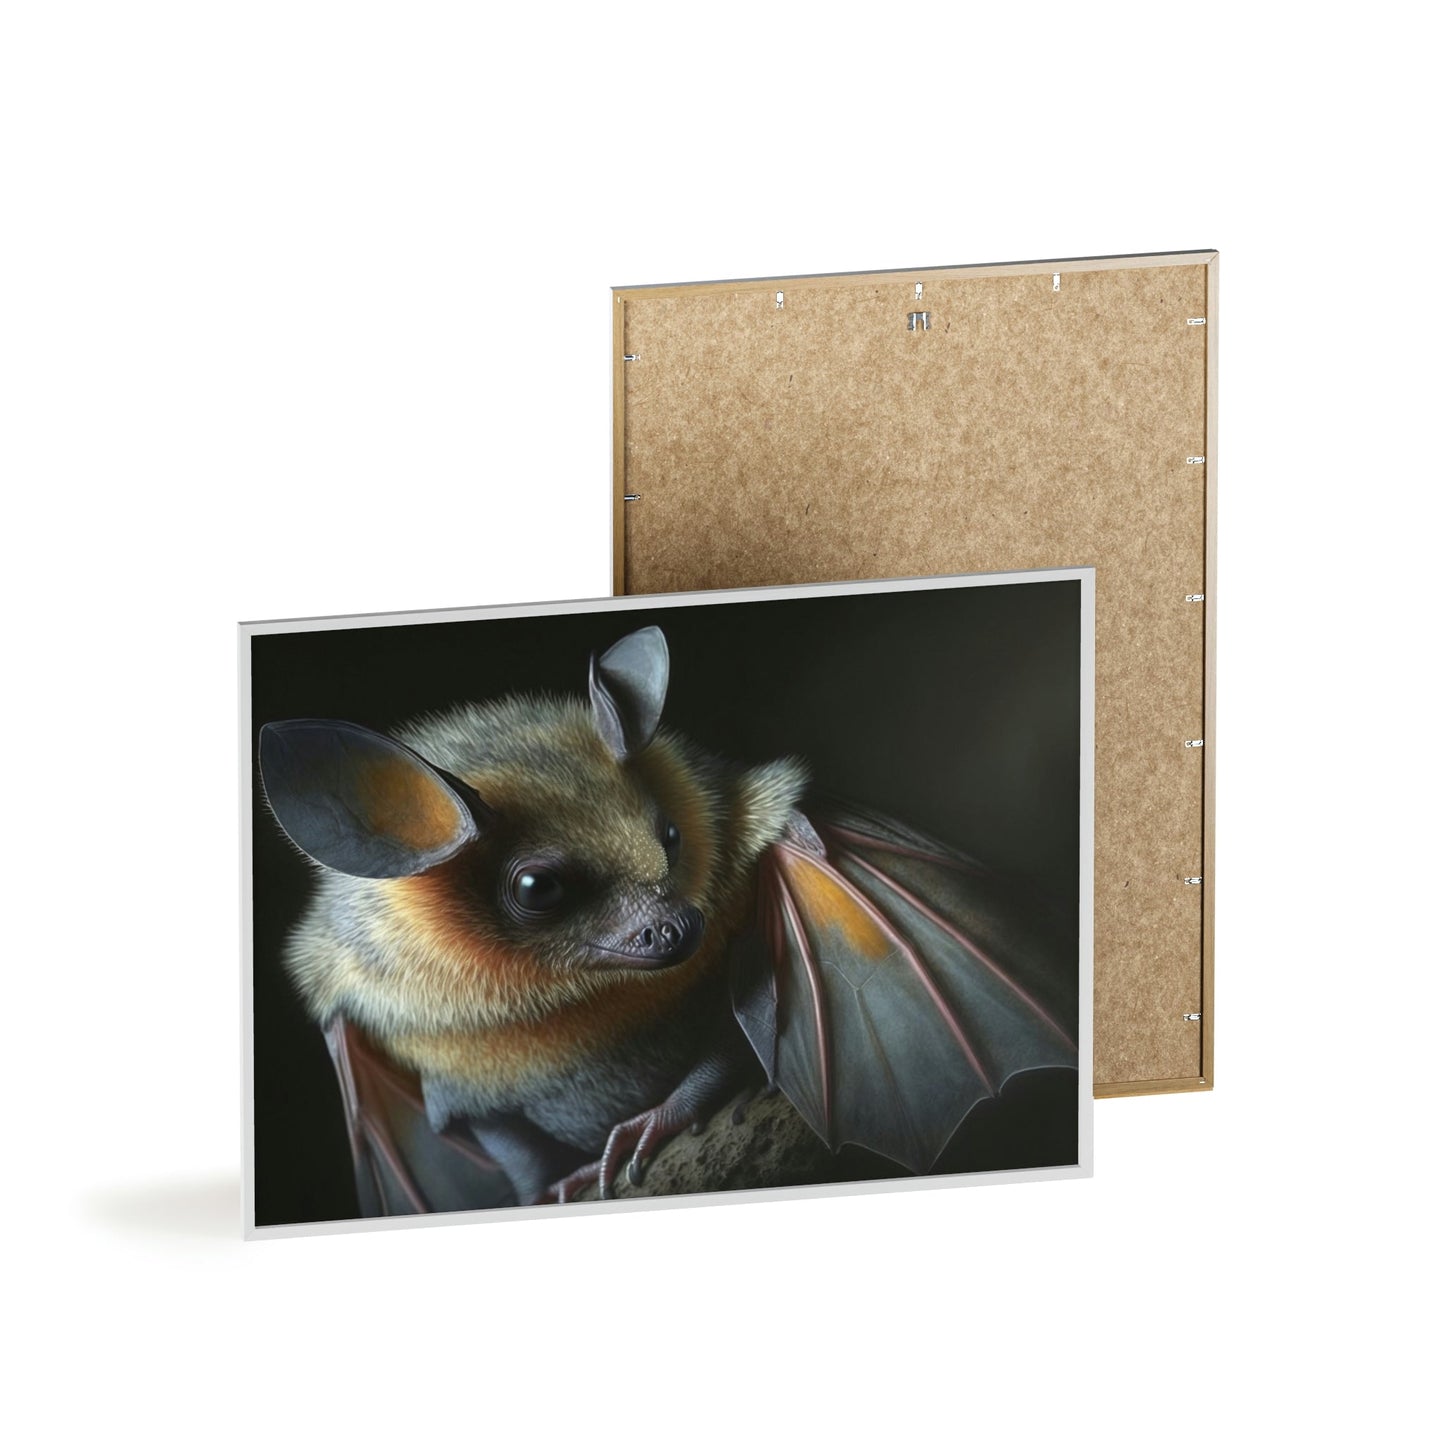 The Elusive Hunter: Framed Canvas & Poster Print of a Bat in Action